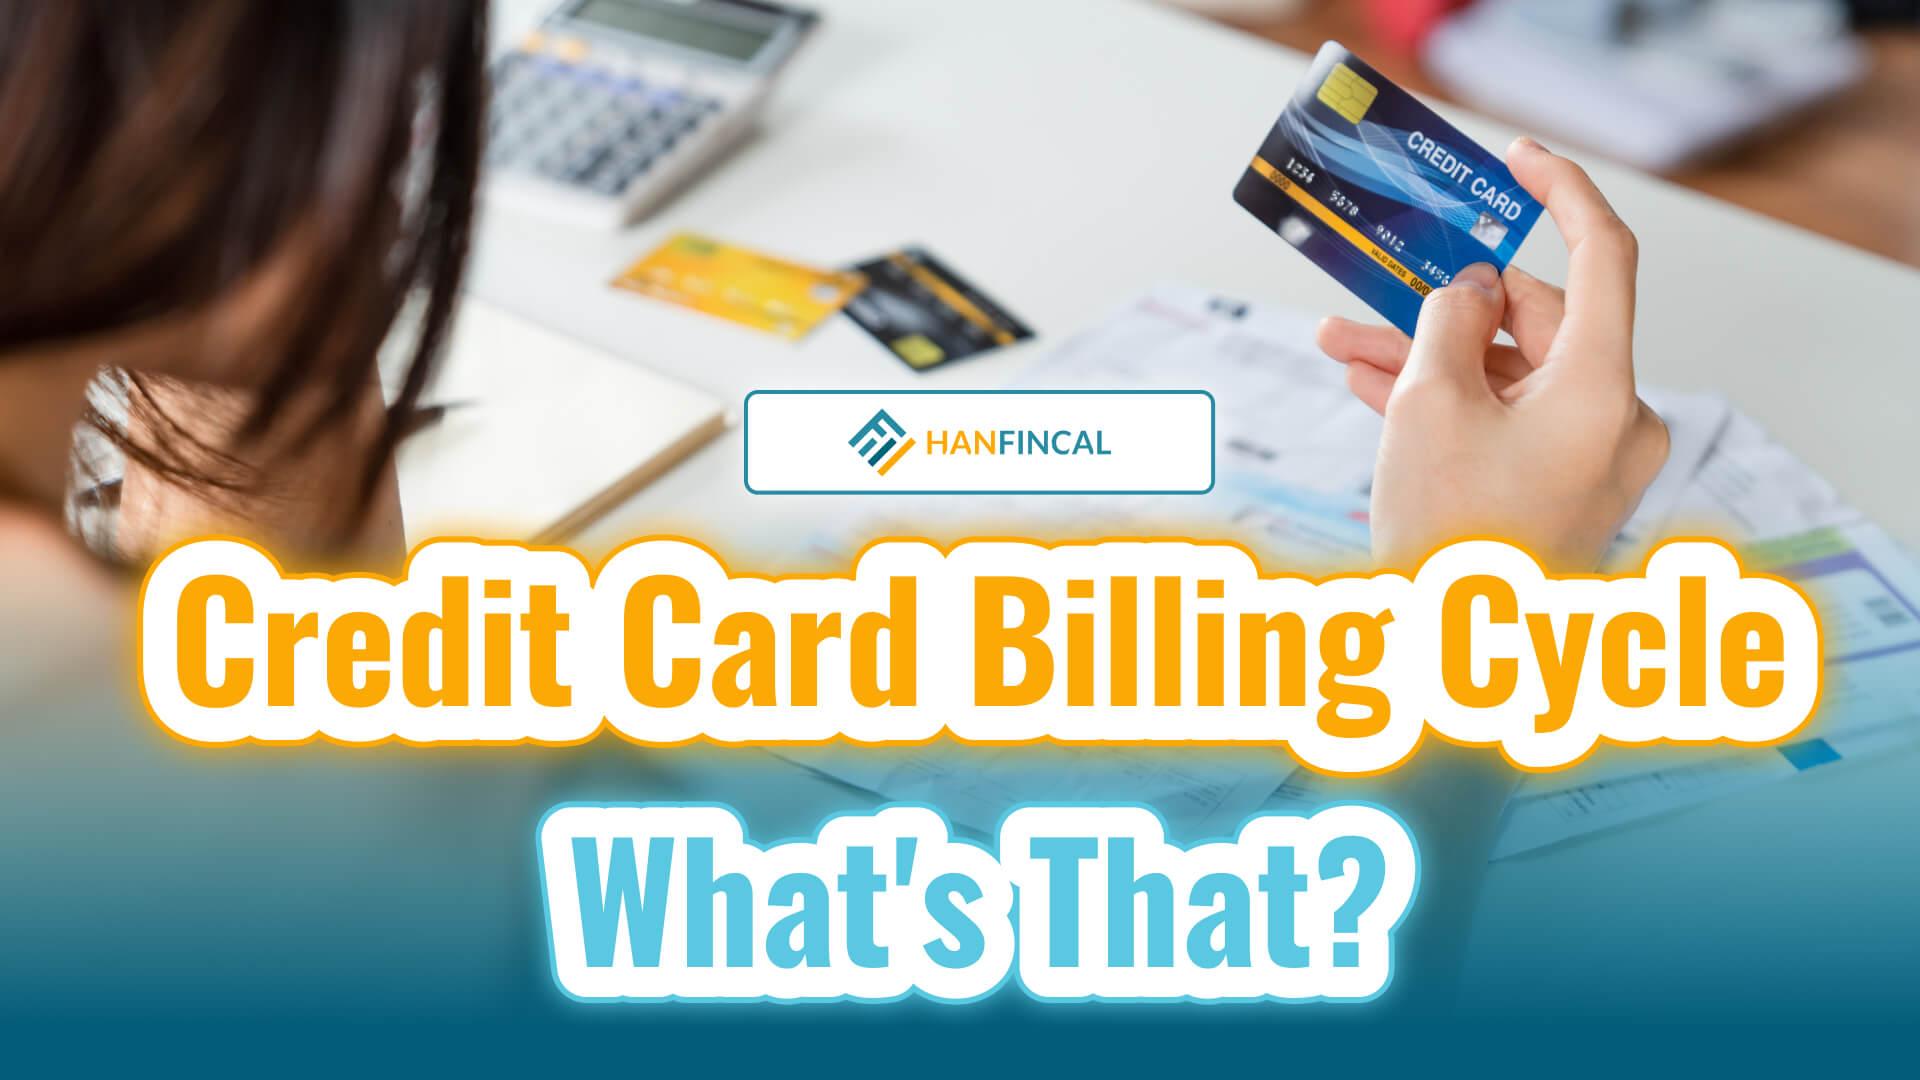 what-is-a-credit-card-billing-cycle-hanfincal-justpaste-it